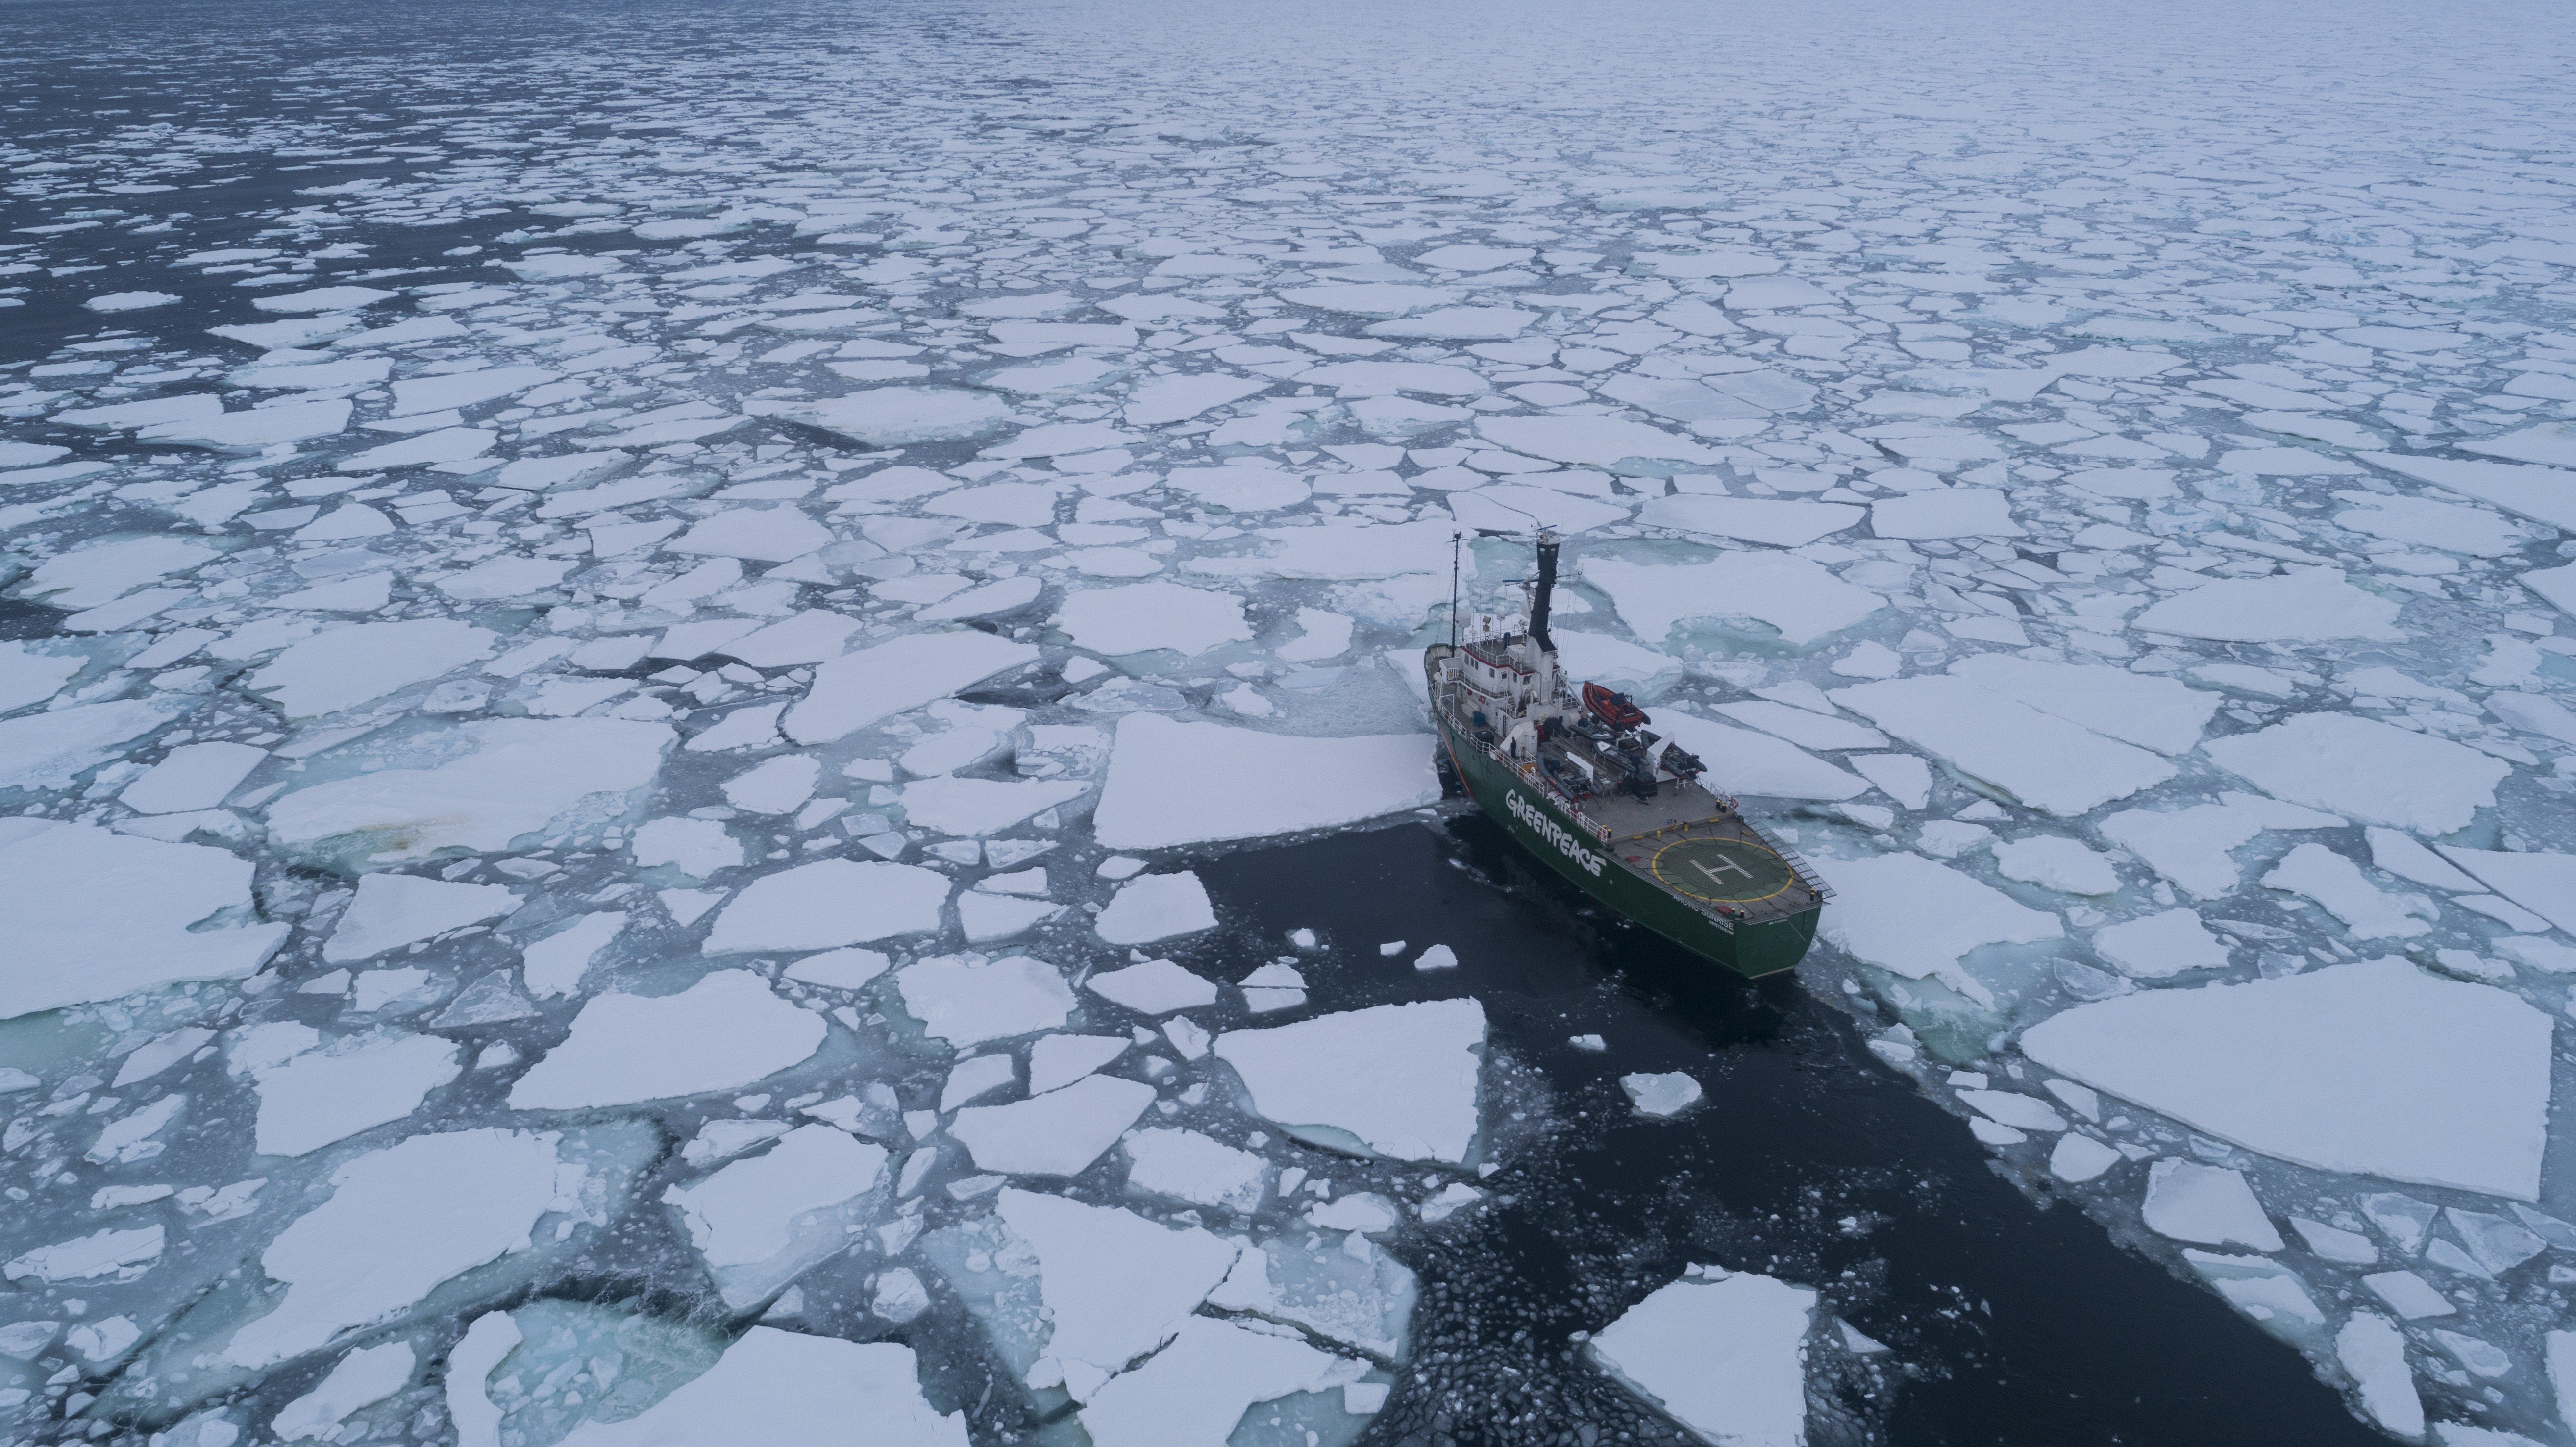 The Greenpeace ship Arctic Sunrise takes scientists to test sea ice in the Fram Strait between the Norwegian archipelago of Svalbard and Greenland. Picture: Denis Sinyakov / Greenpeace